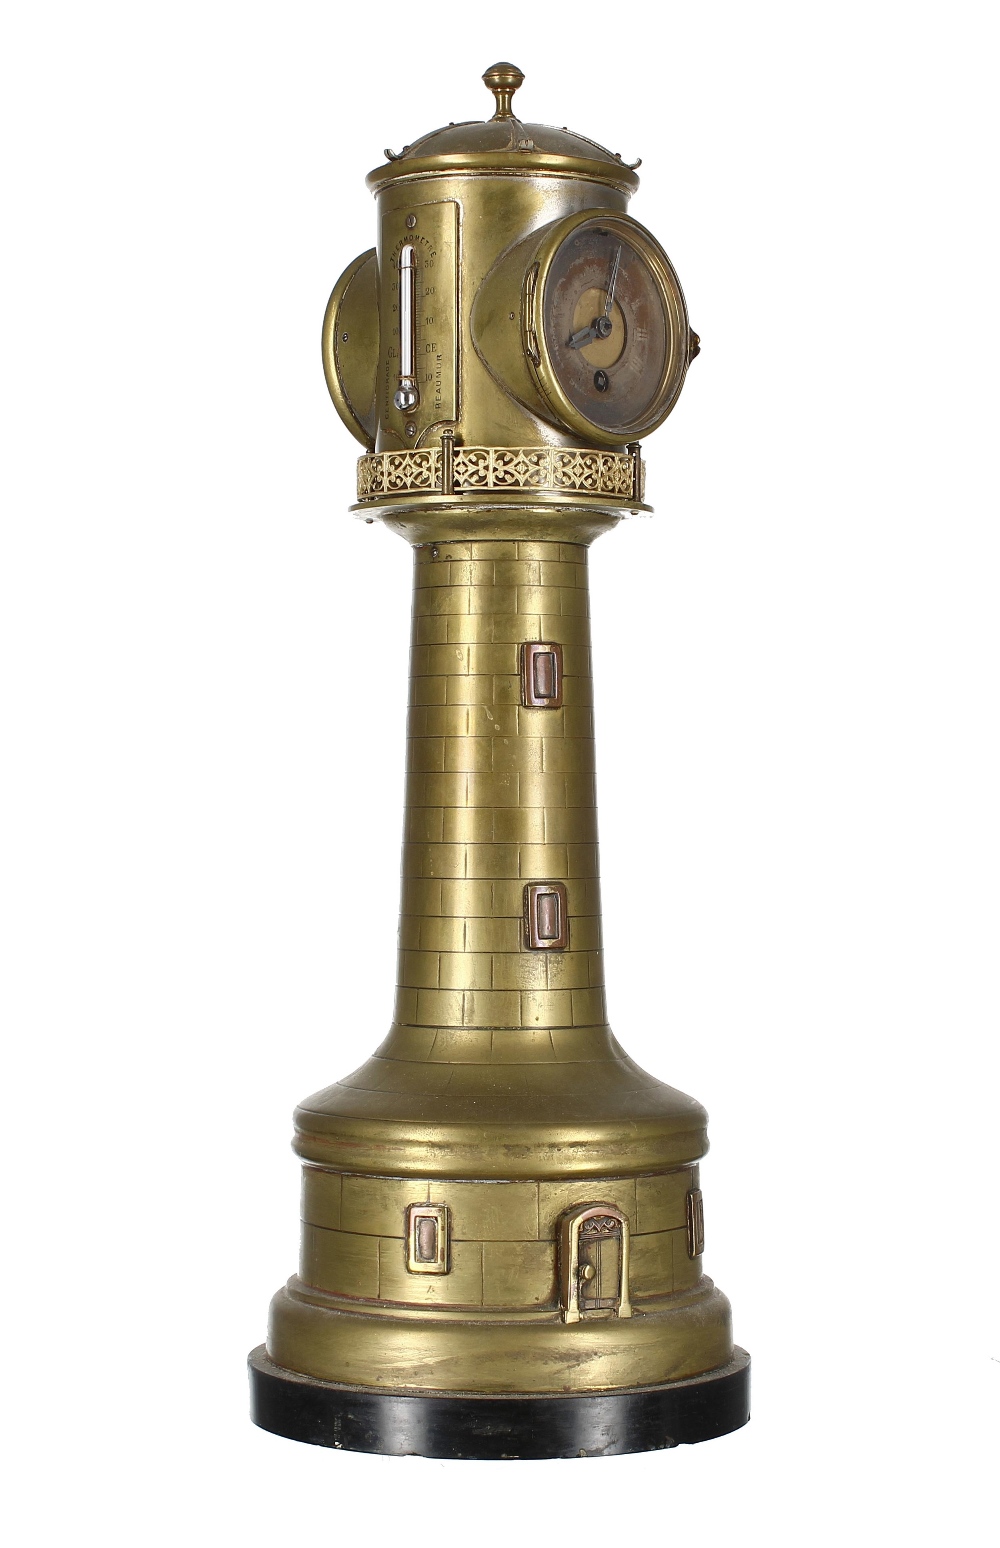 Interesting silver plated on brass novelty light house clock in the manner of André Romain